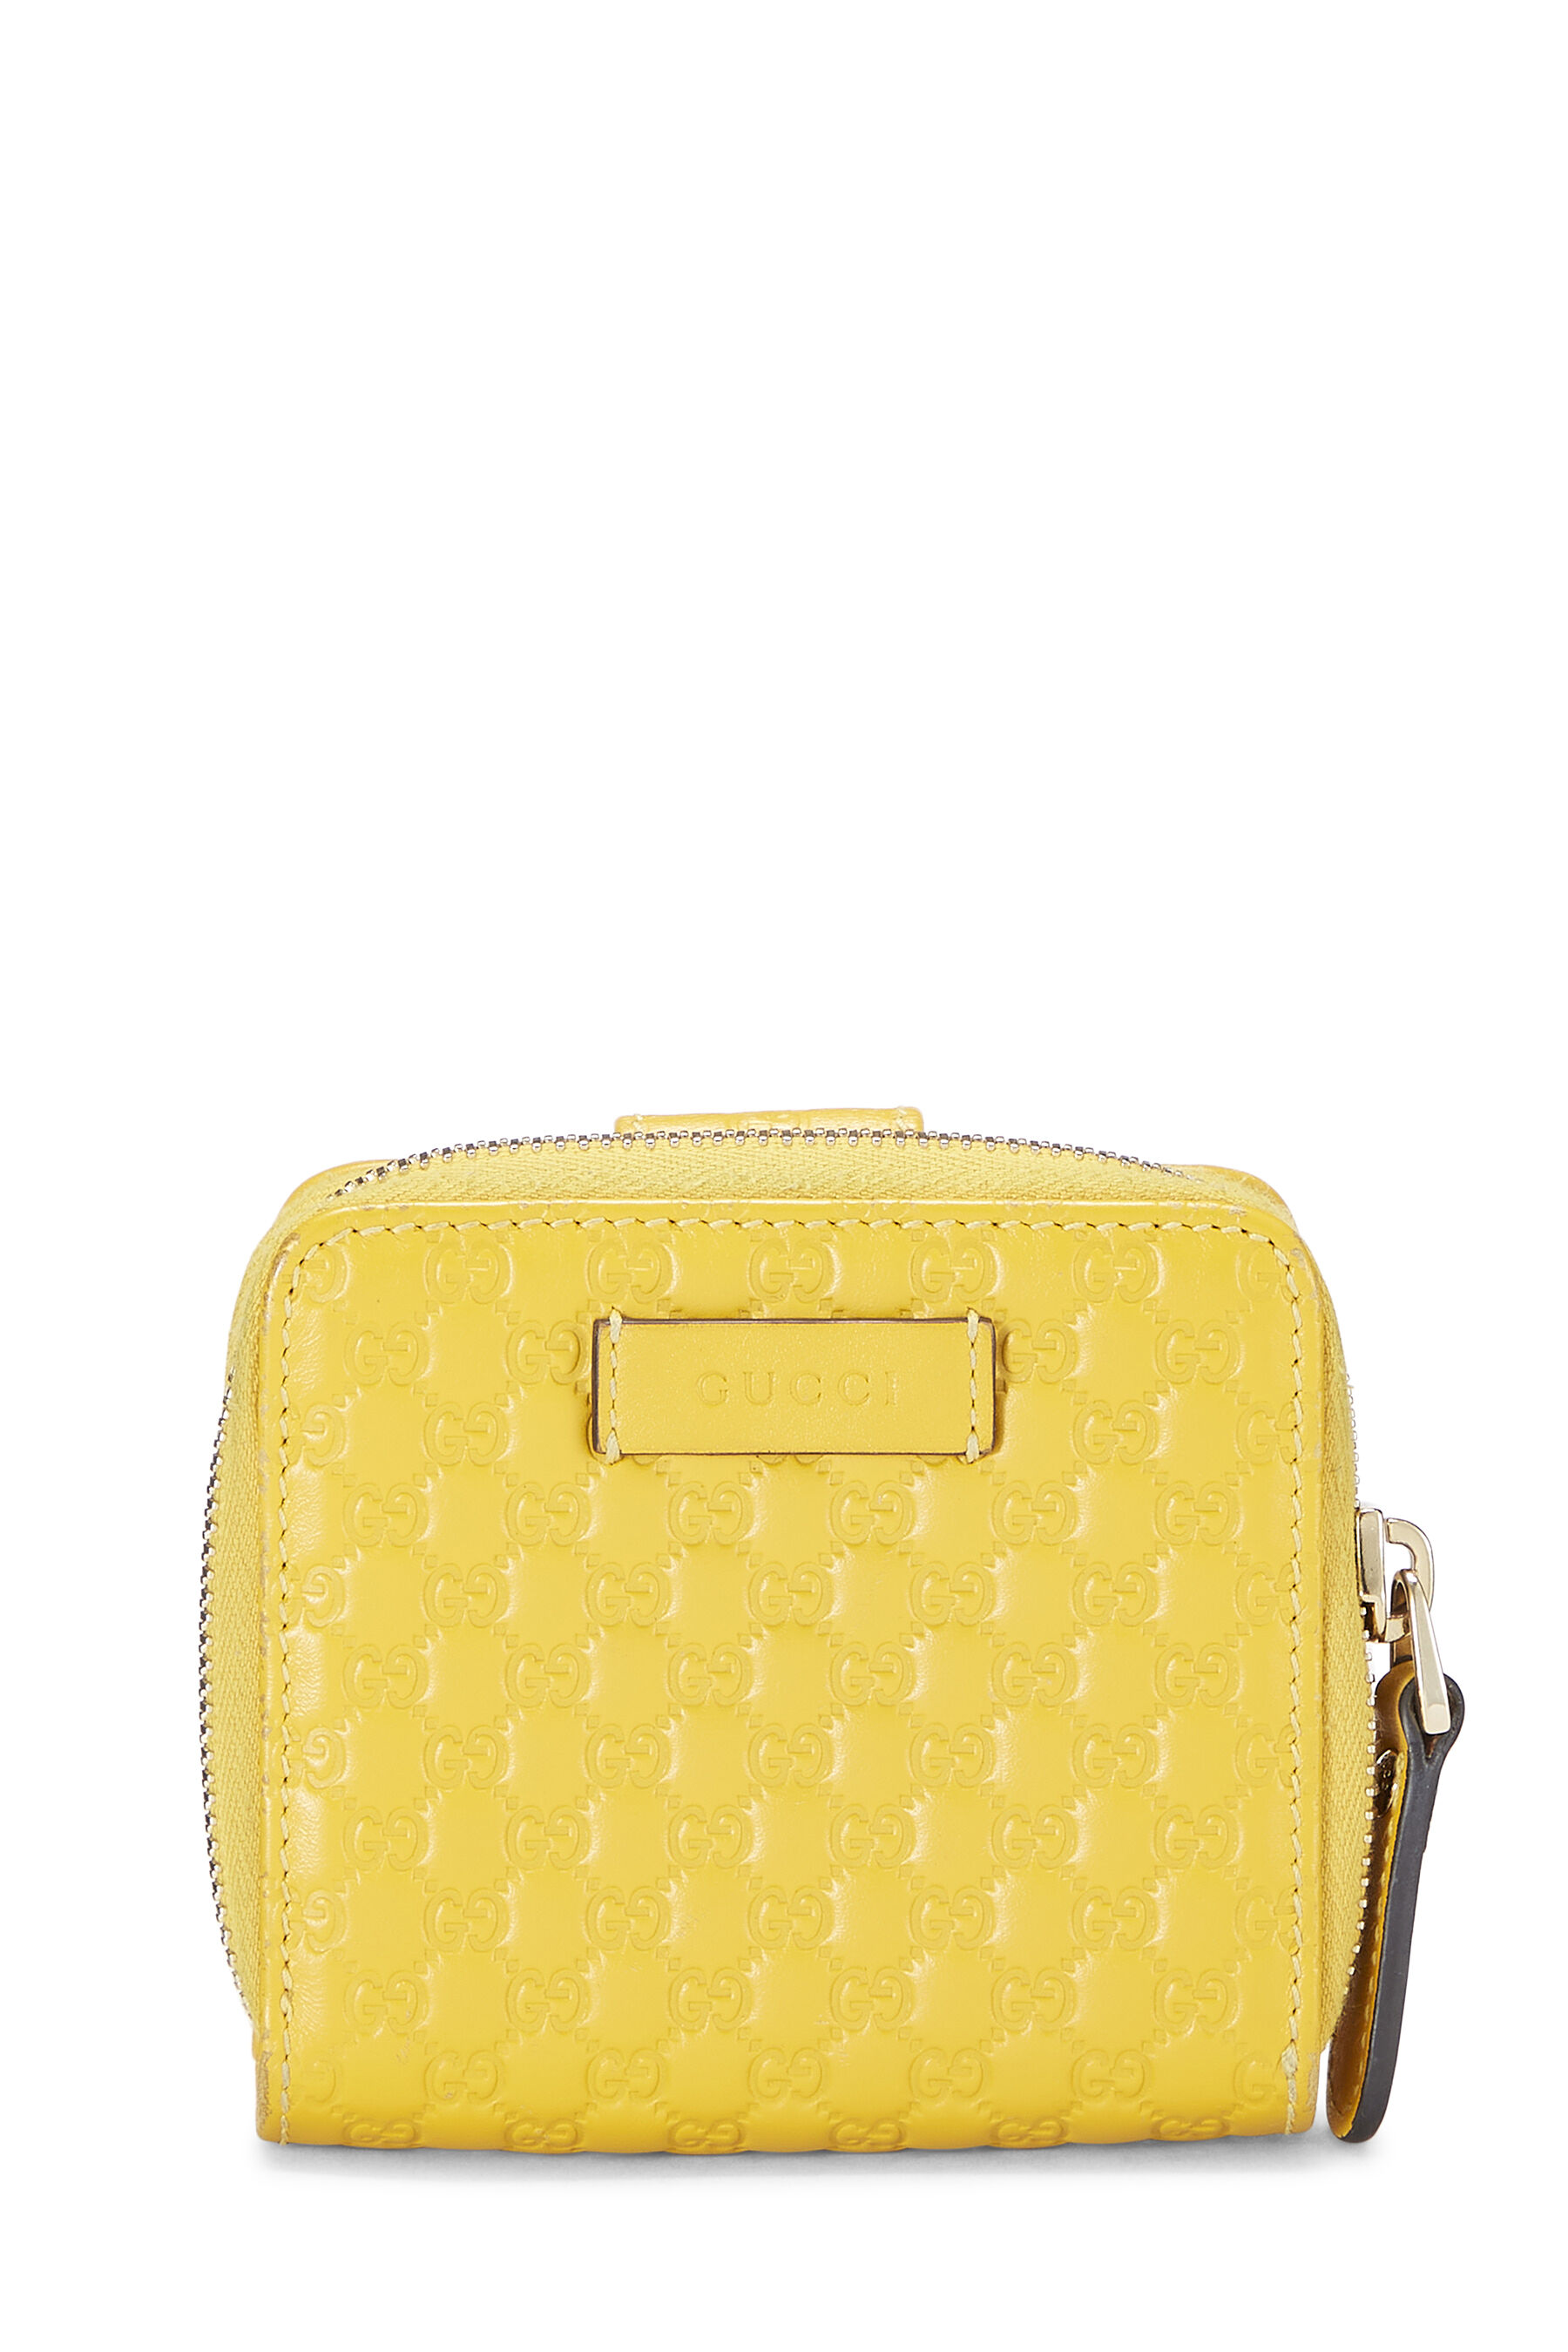 Pre-owned Gucci Yellow Microssima Leather Compact Wallet